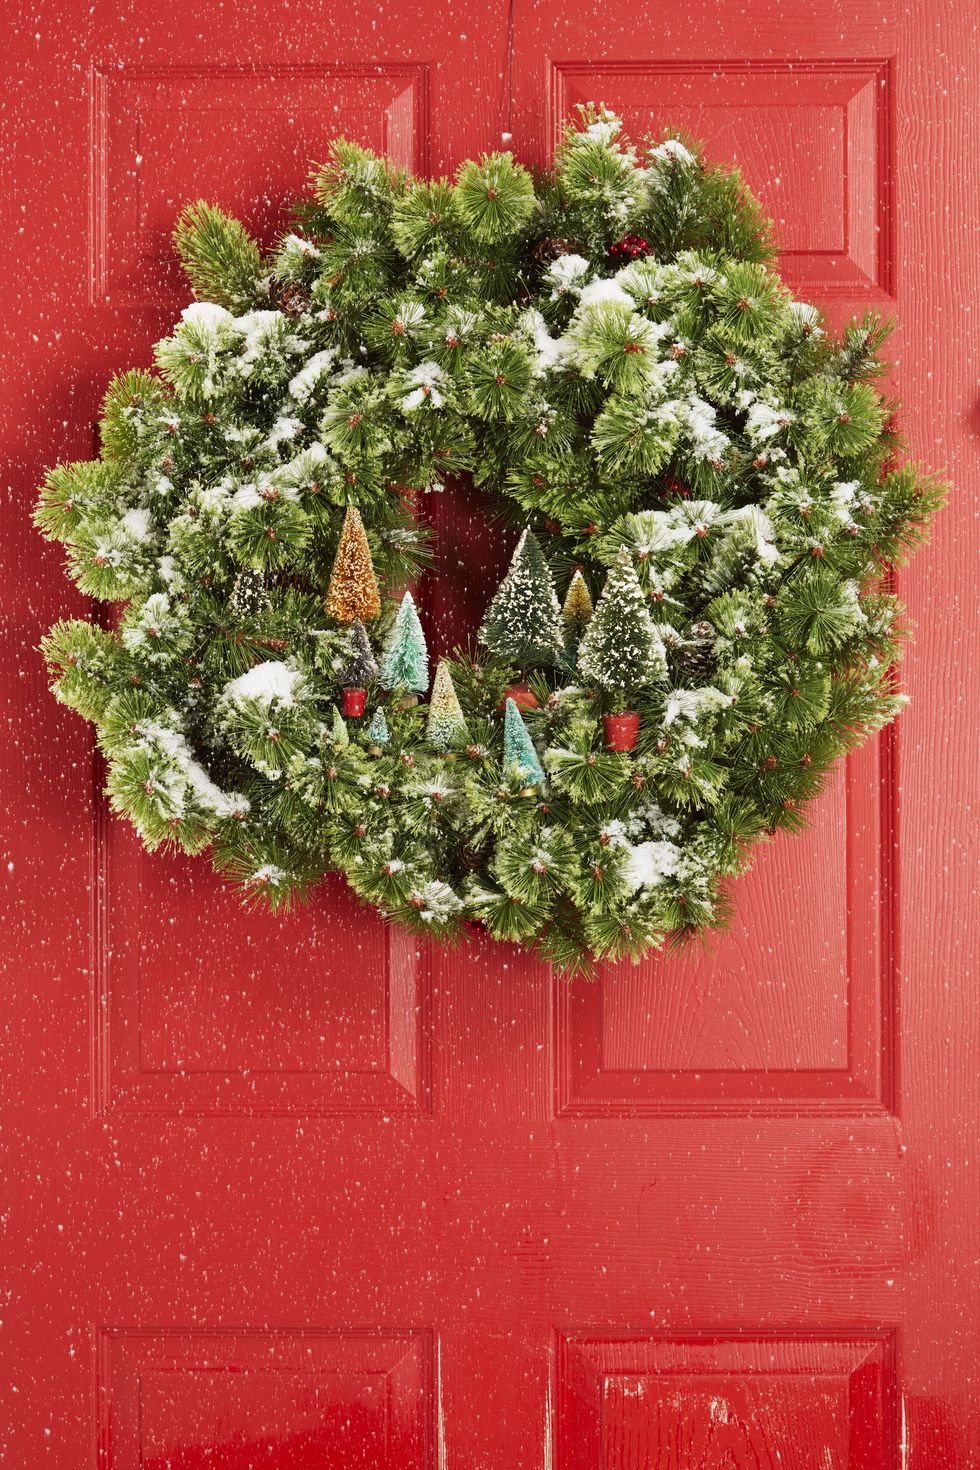 Beautiful DIY Christmas Wreath Ideas for a Welcoming Front Door